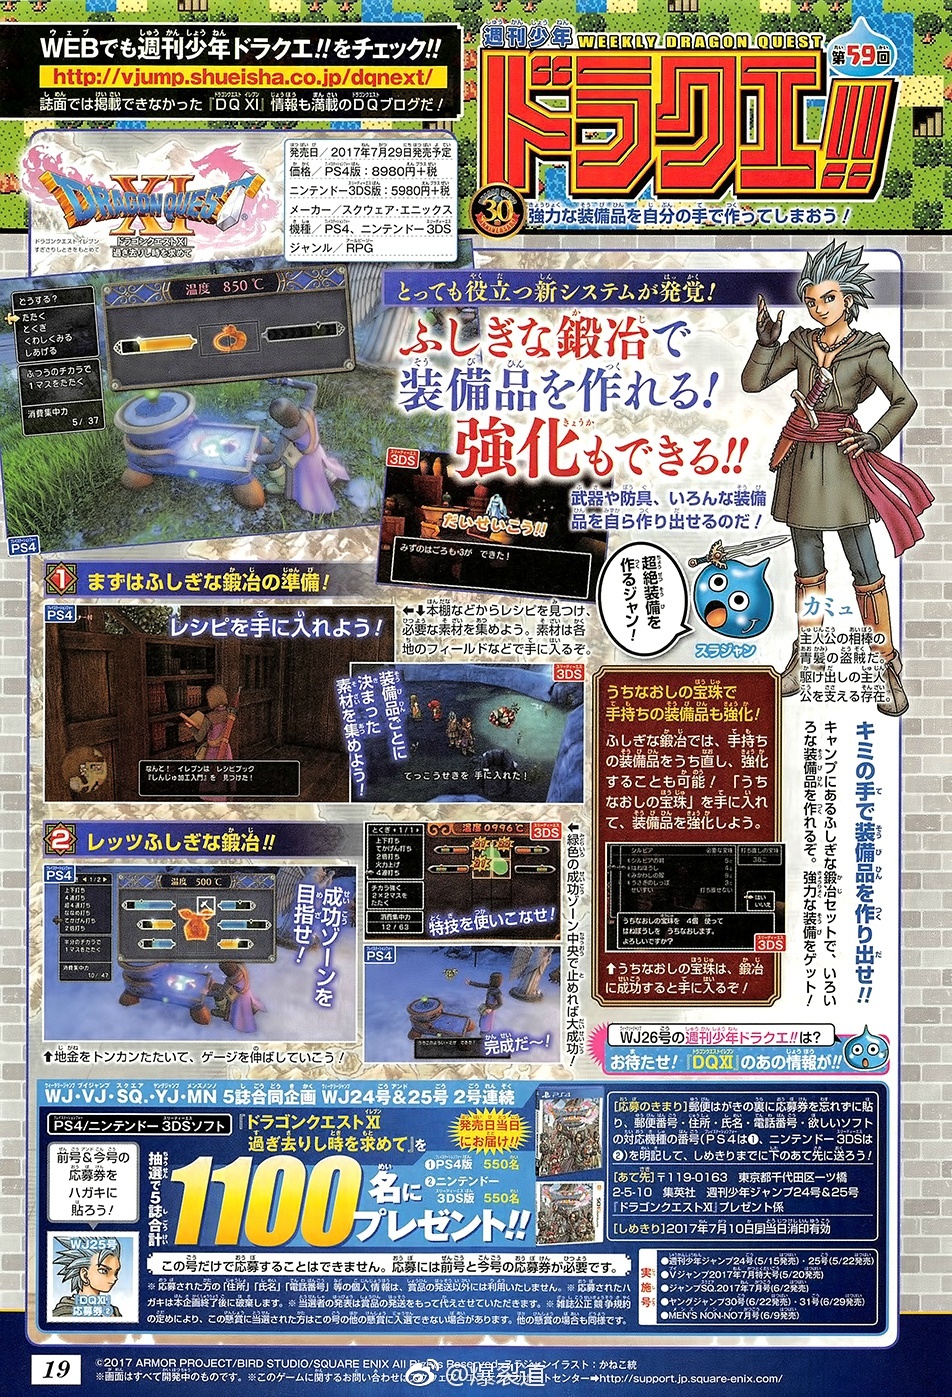 dragon quest xi smithing system